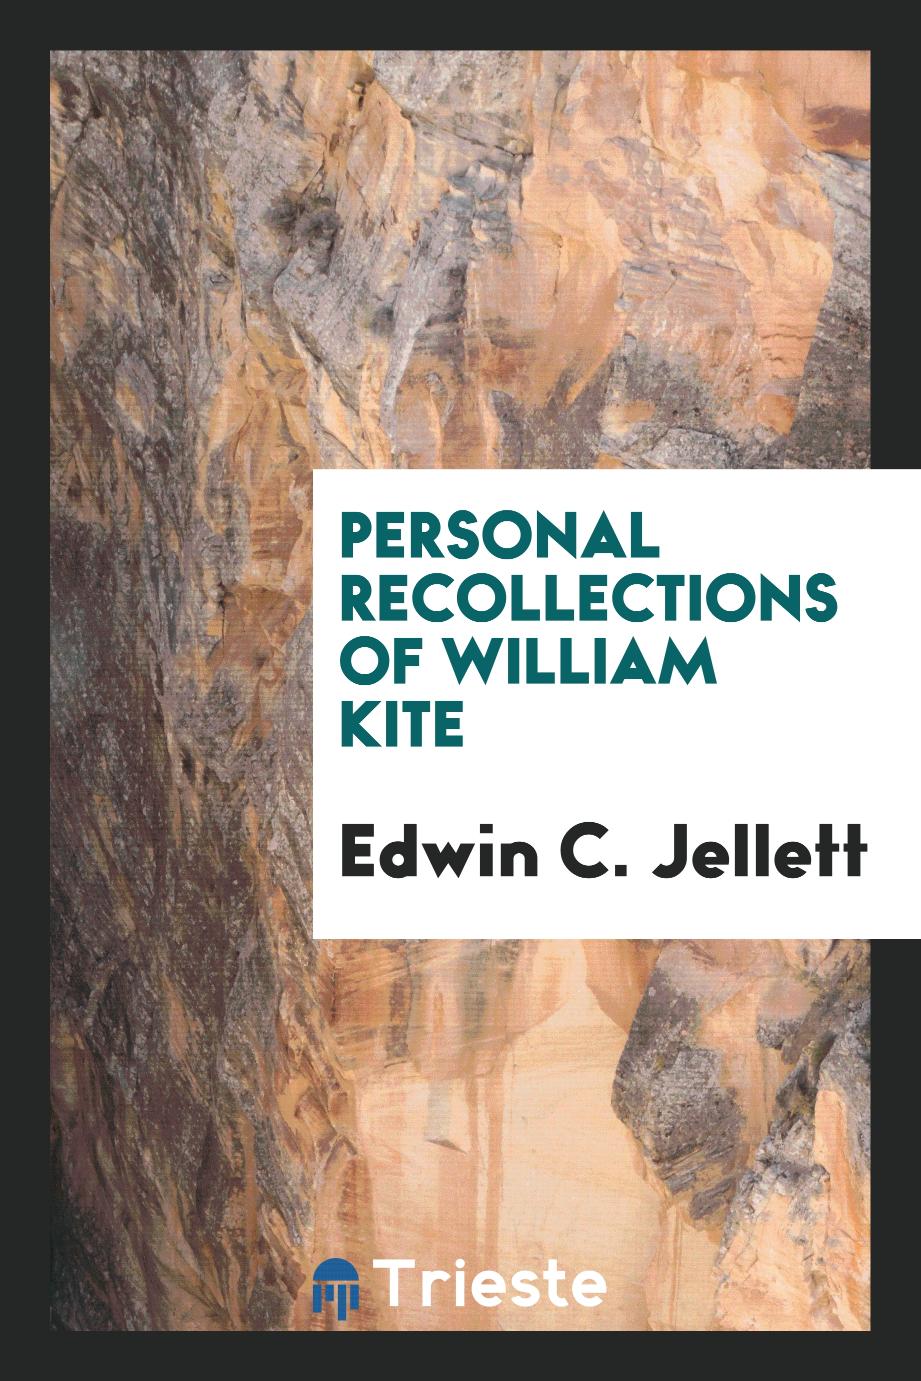 Personal Recollections of William Kite